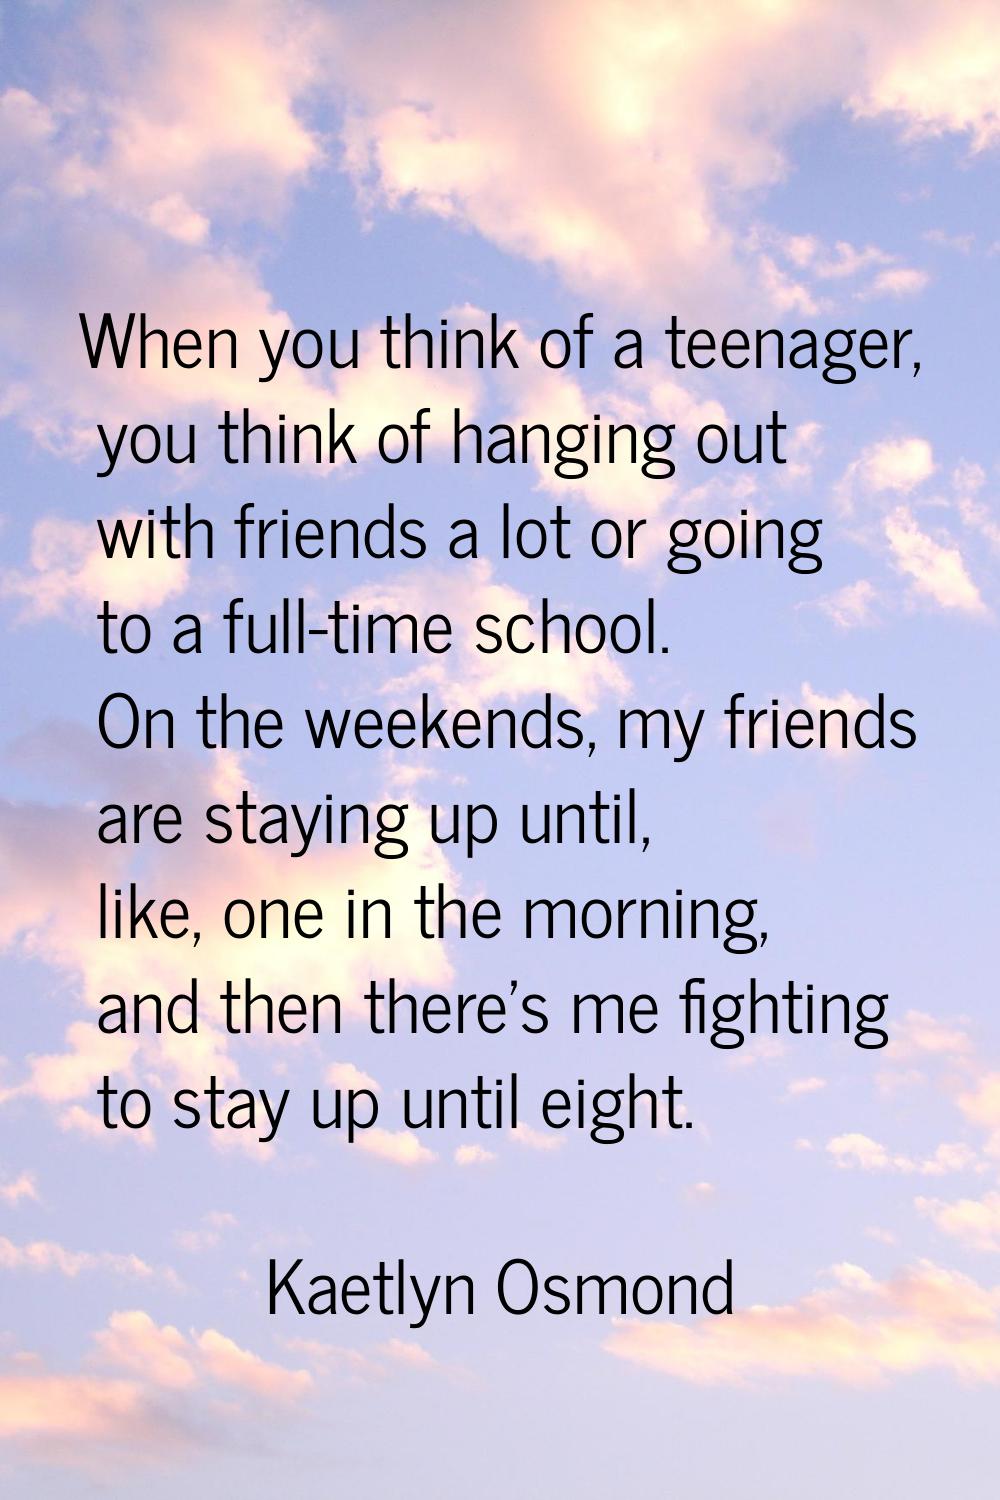 When you think of a teenager, you think of hanging out with friends a lot or going to a full-time s